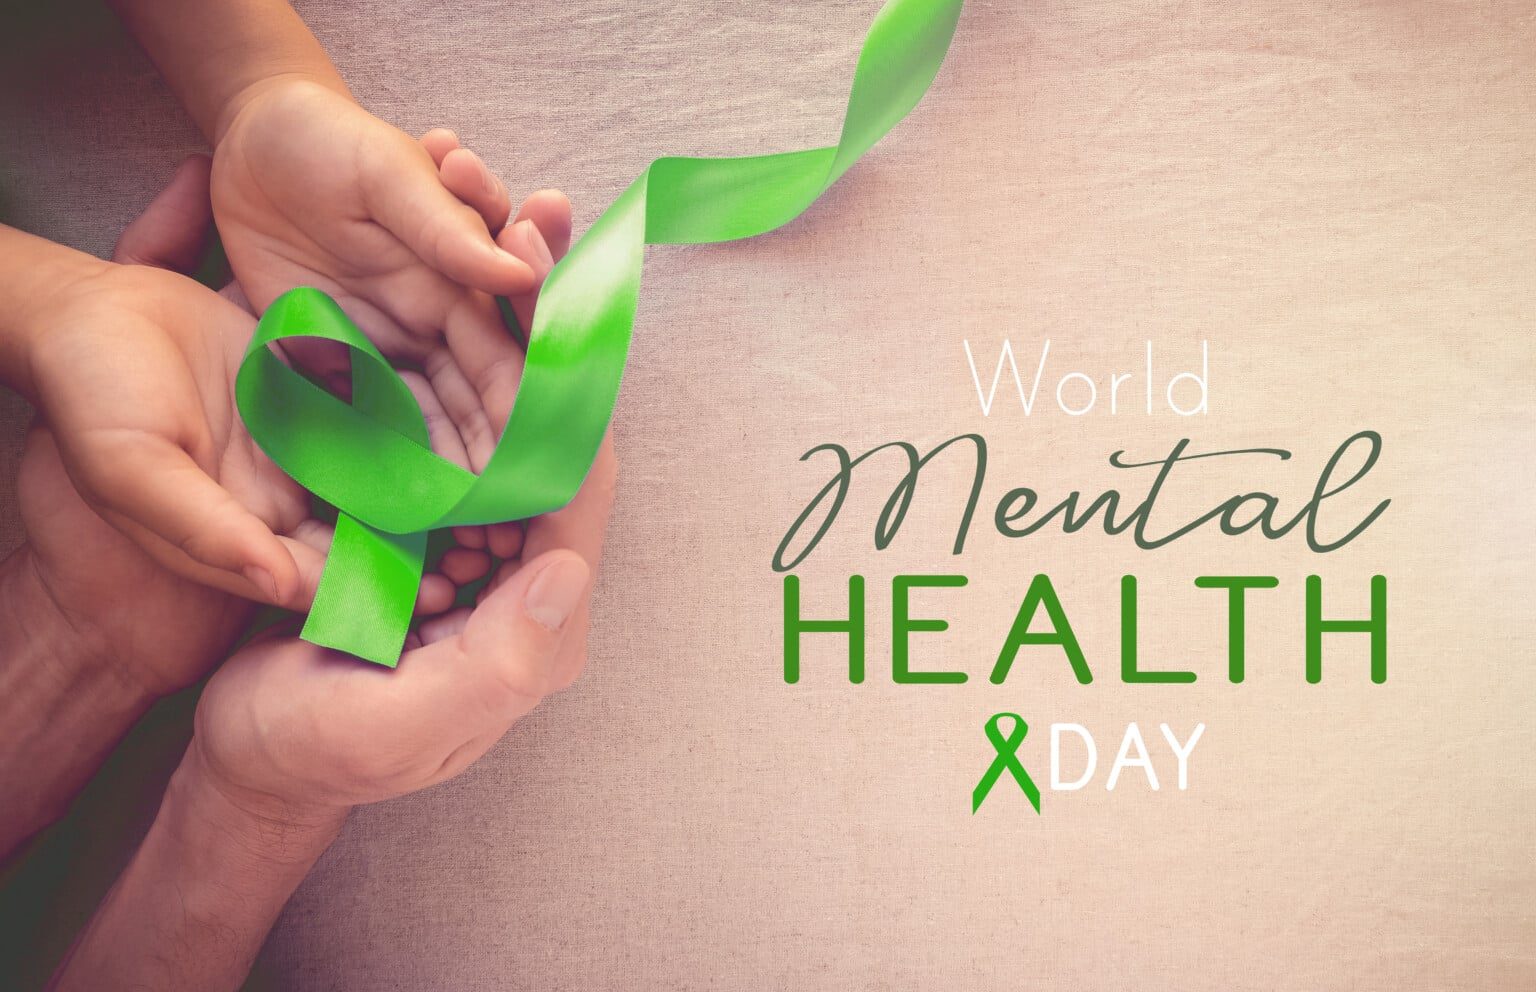 Adult and child hands holding Lime GreenRibbon, world Mental health day